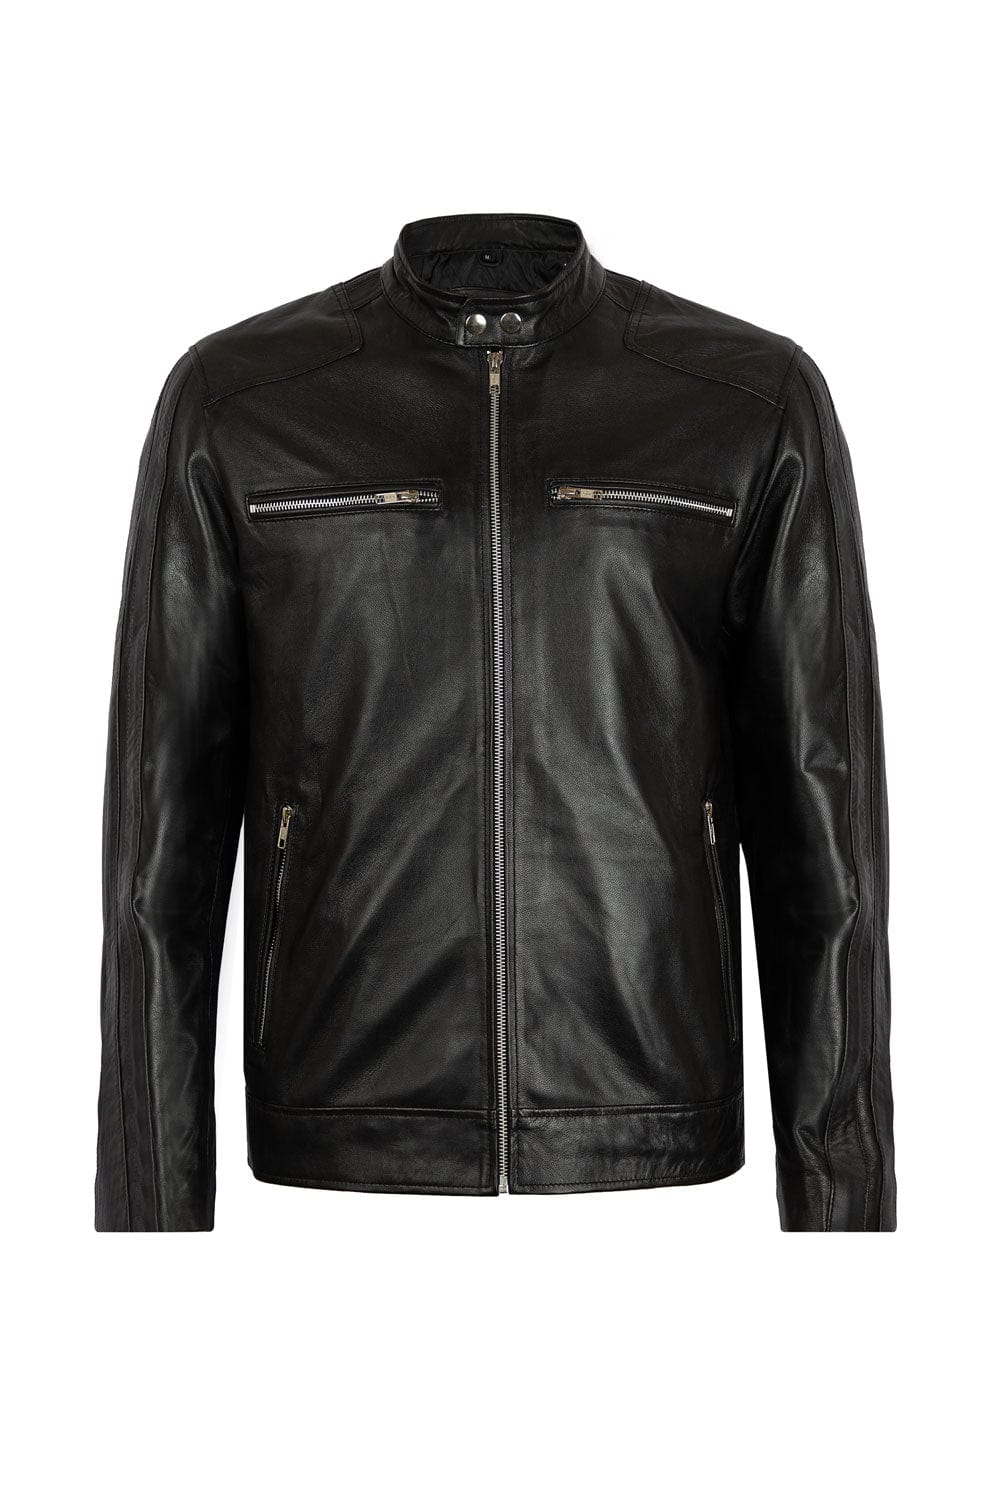 Hope Not Out by Shahid Afridi Men Jacket Premium Leather Jacket With Zipper Pockets